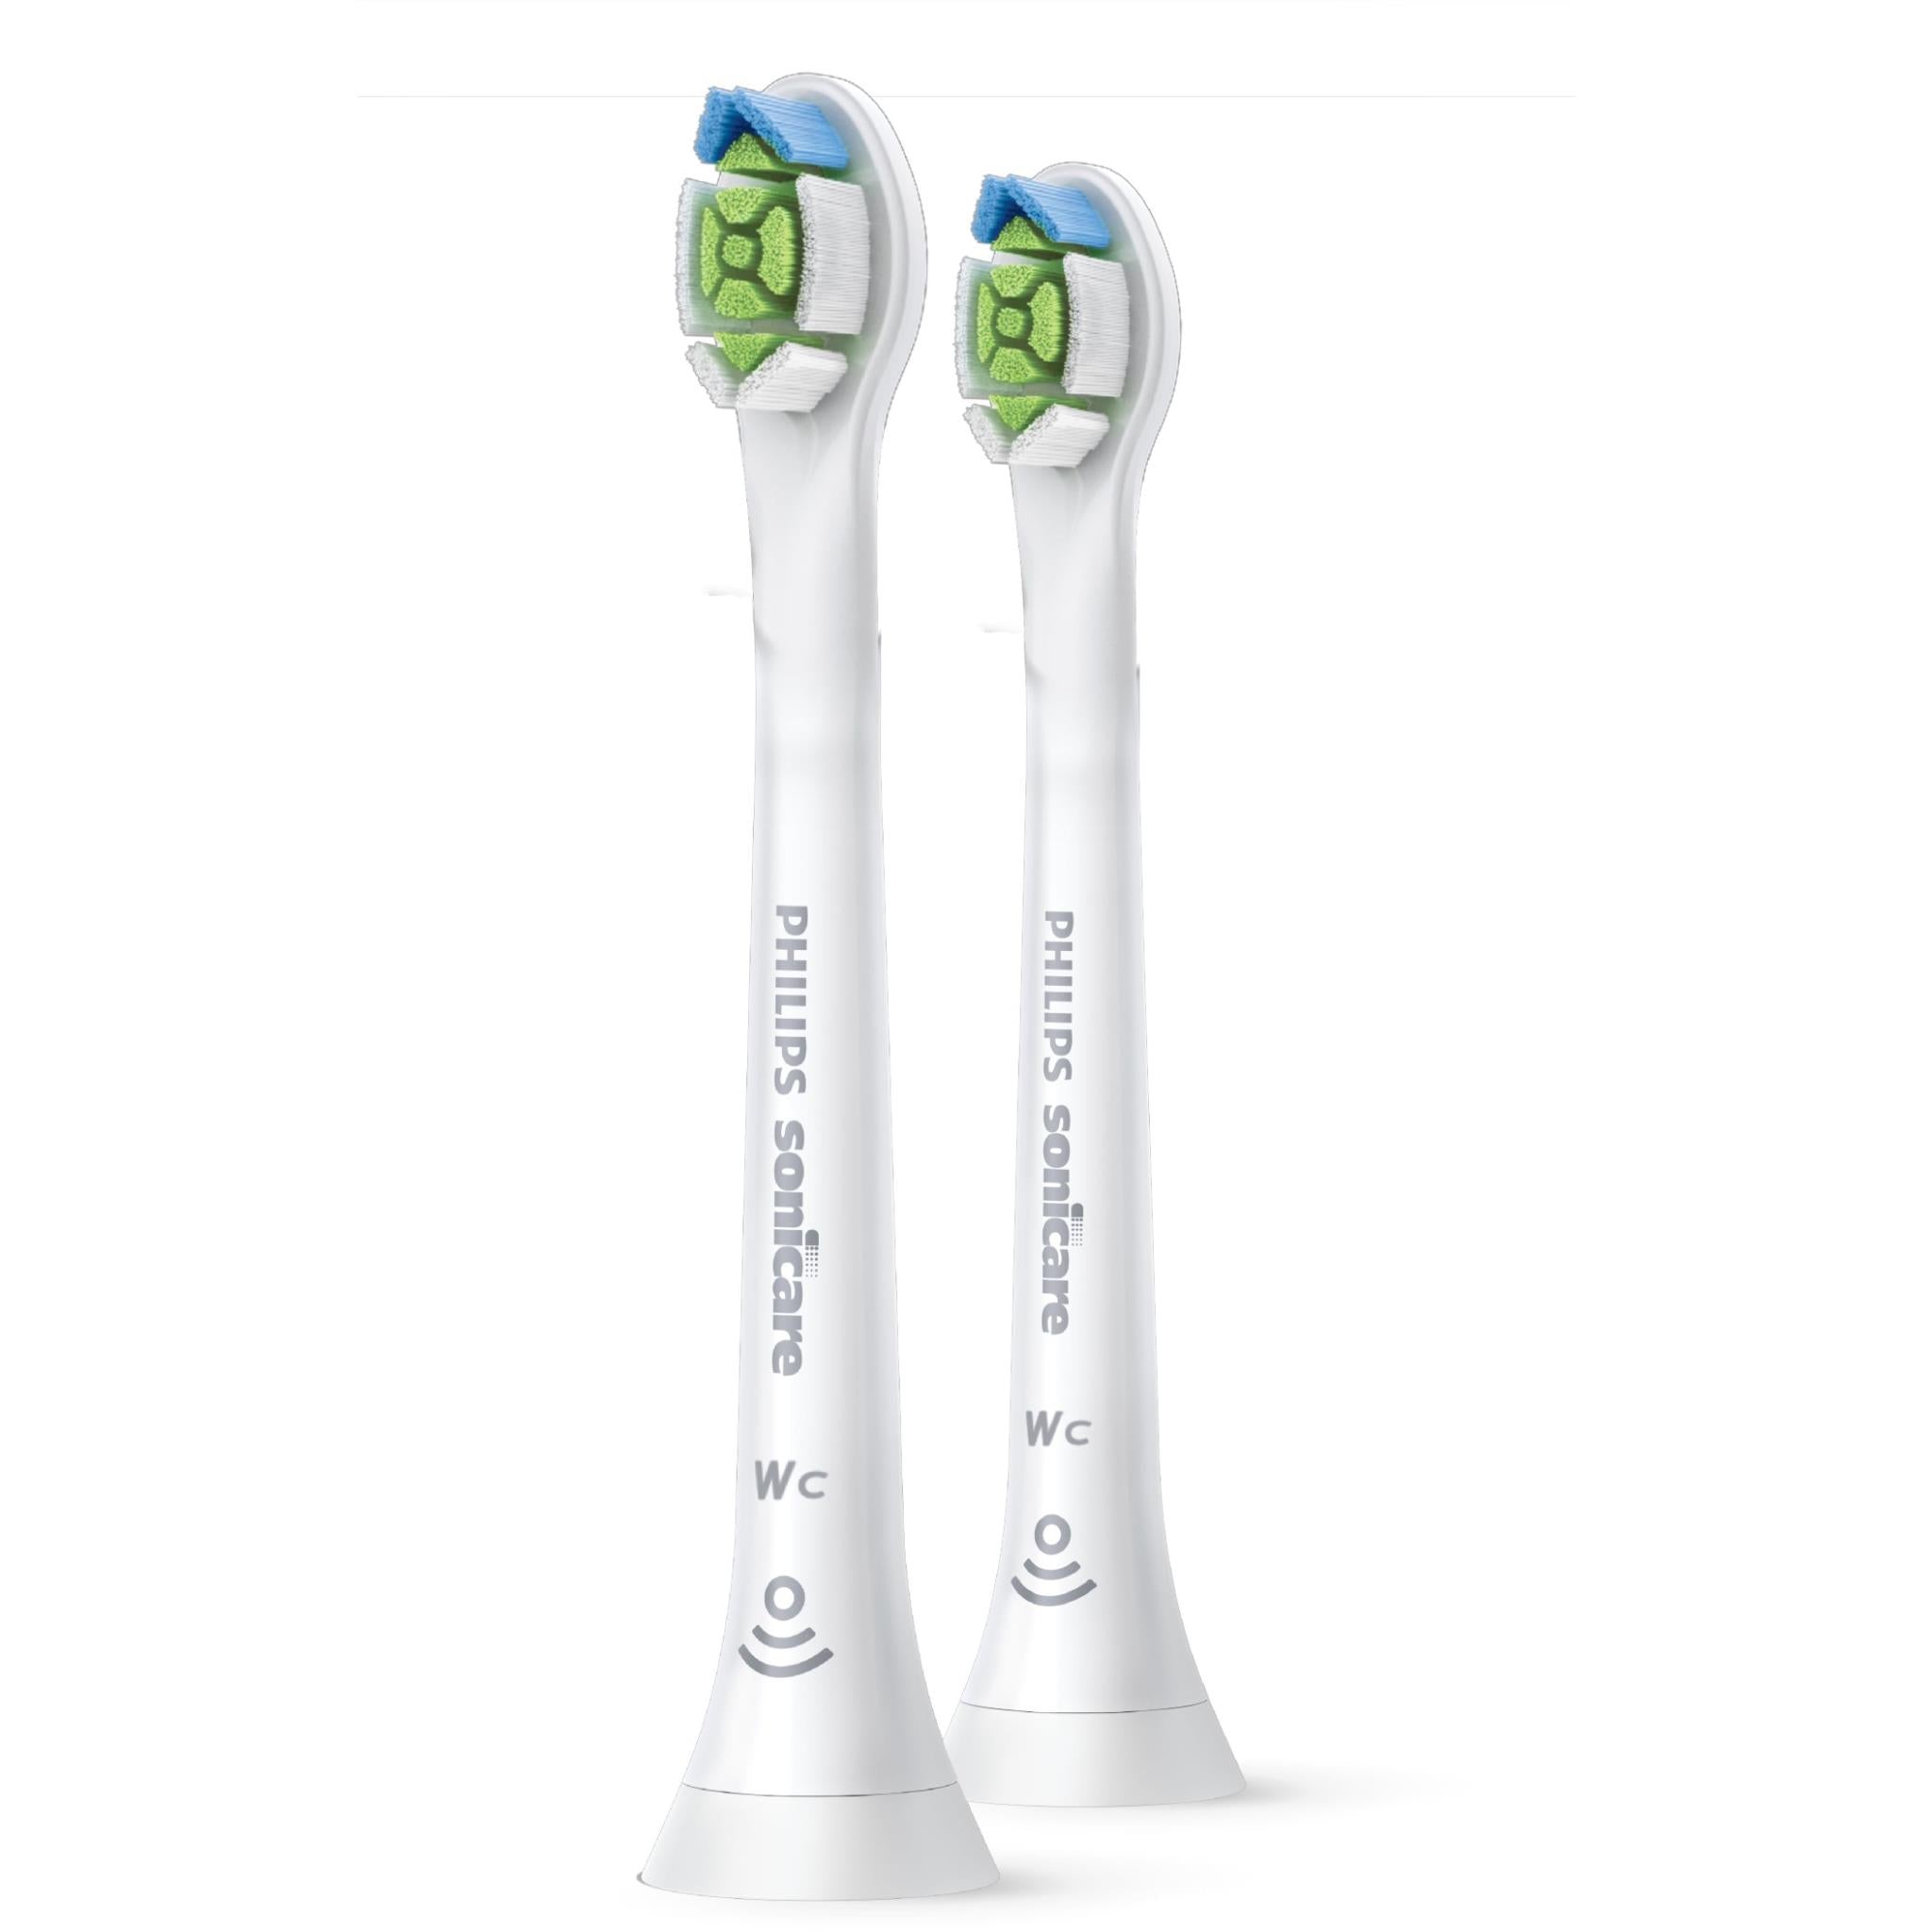 philips sonicare wc optimal white compact replacment brush heads (2 pack)